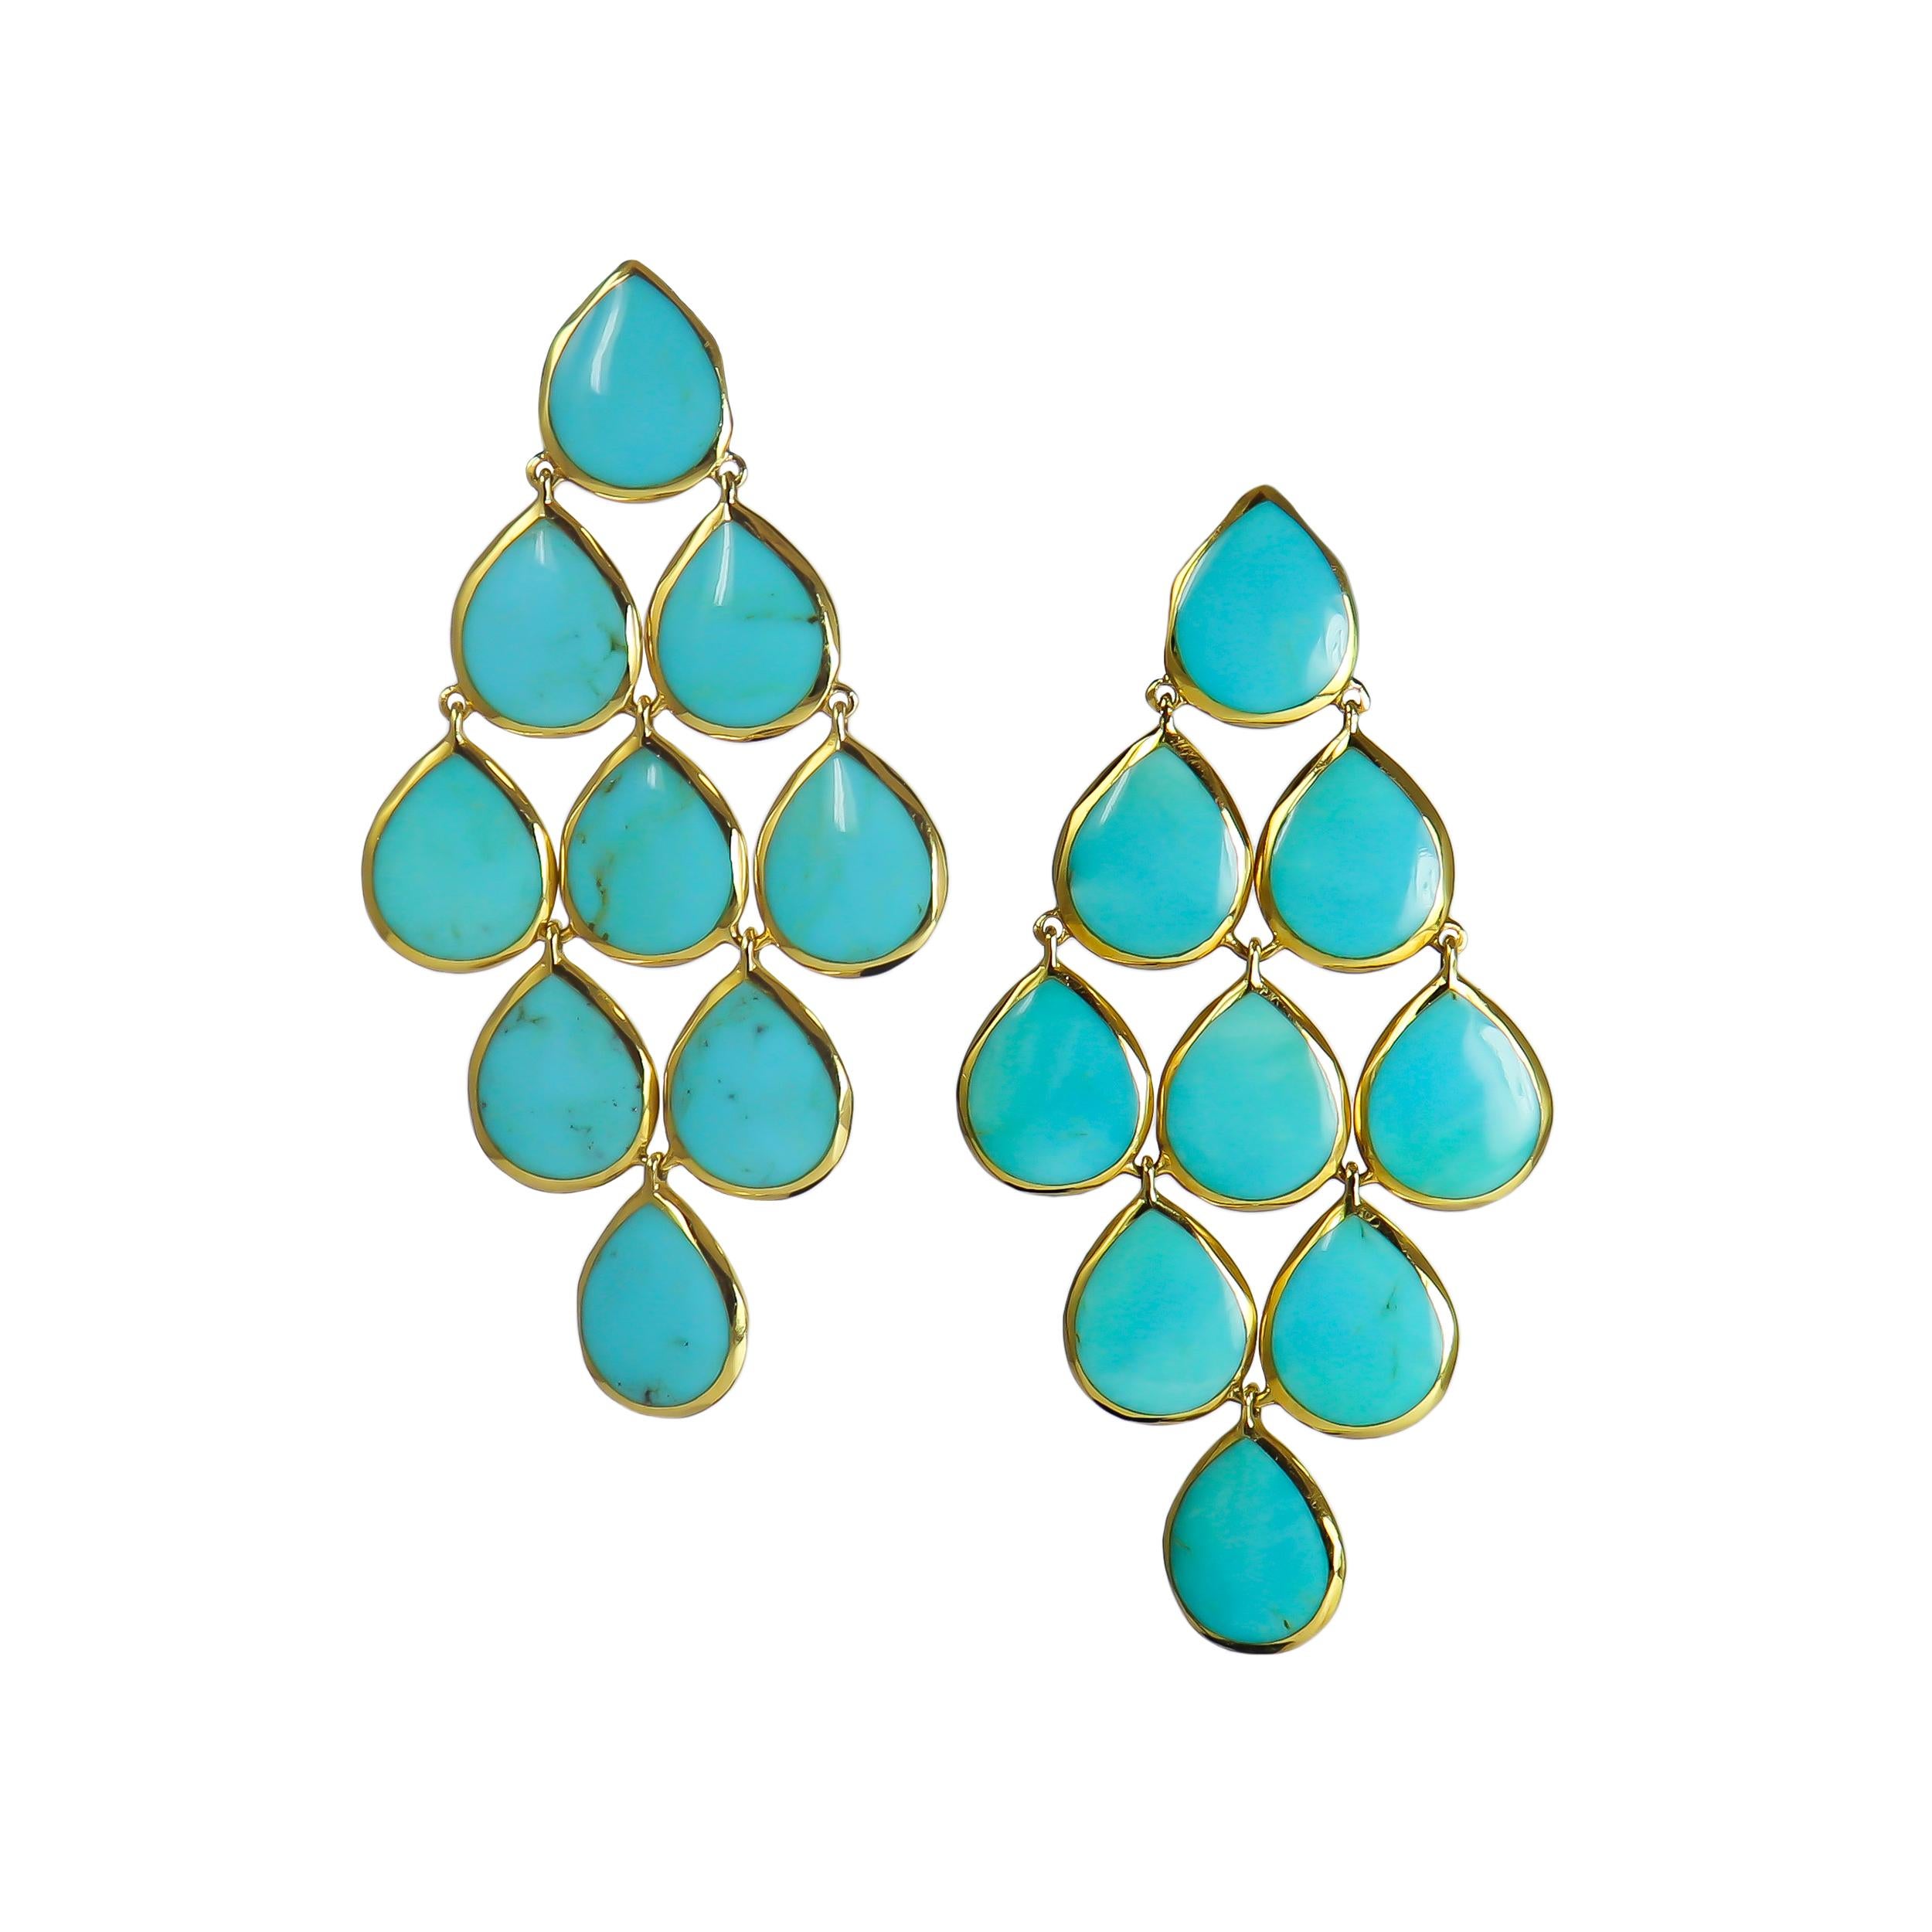 These beautiful, chandelier style earrings feature richly saturated, turquoise cabochons delicately bezel-set in 18K yellow gold. Suspended from posts with heavy friction backs, these earrings are the perfect accessory to easily dress up or down!